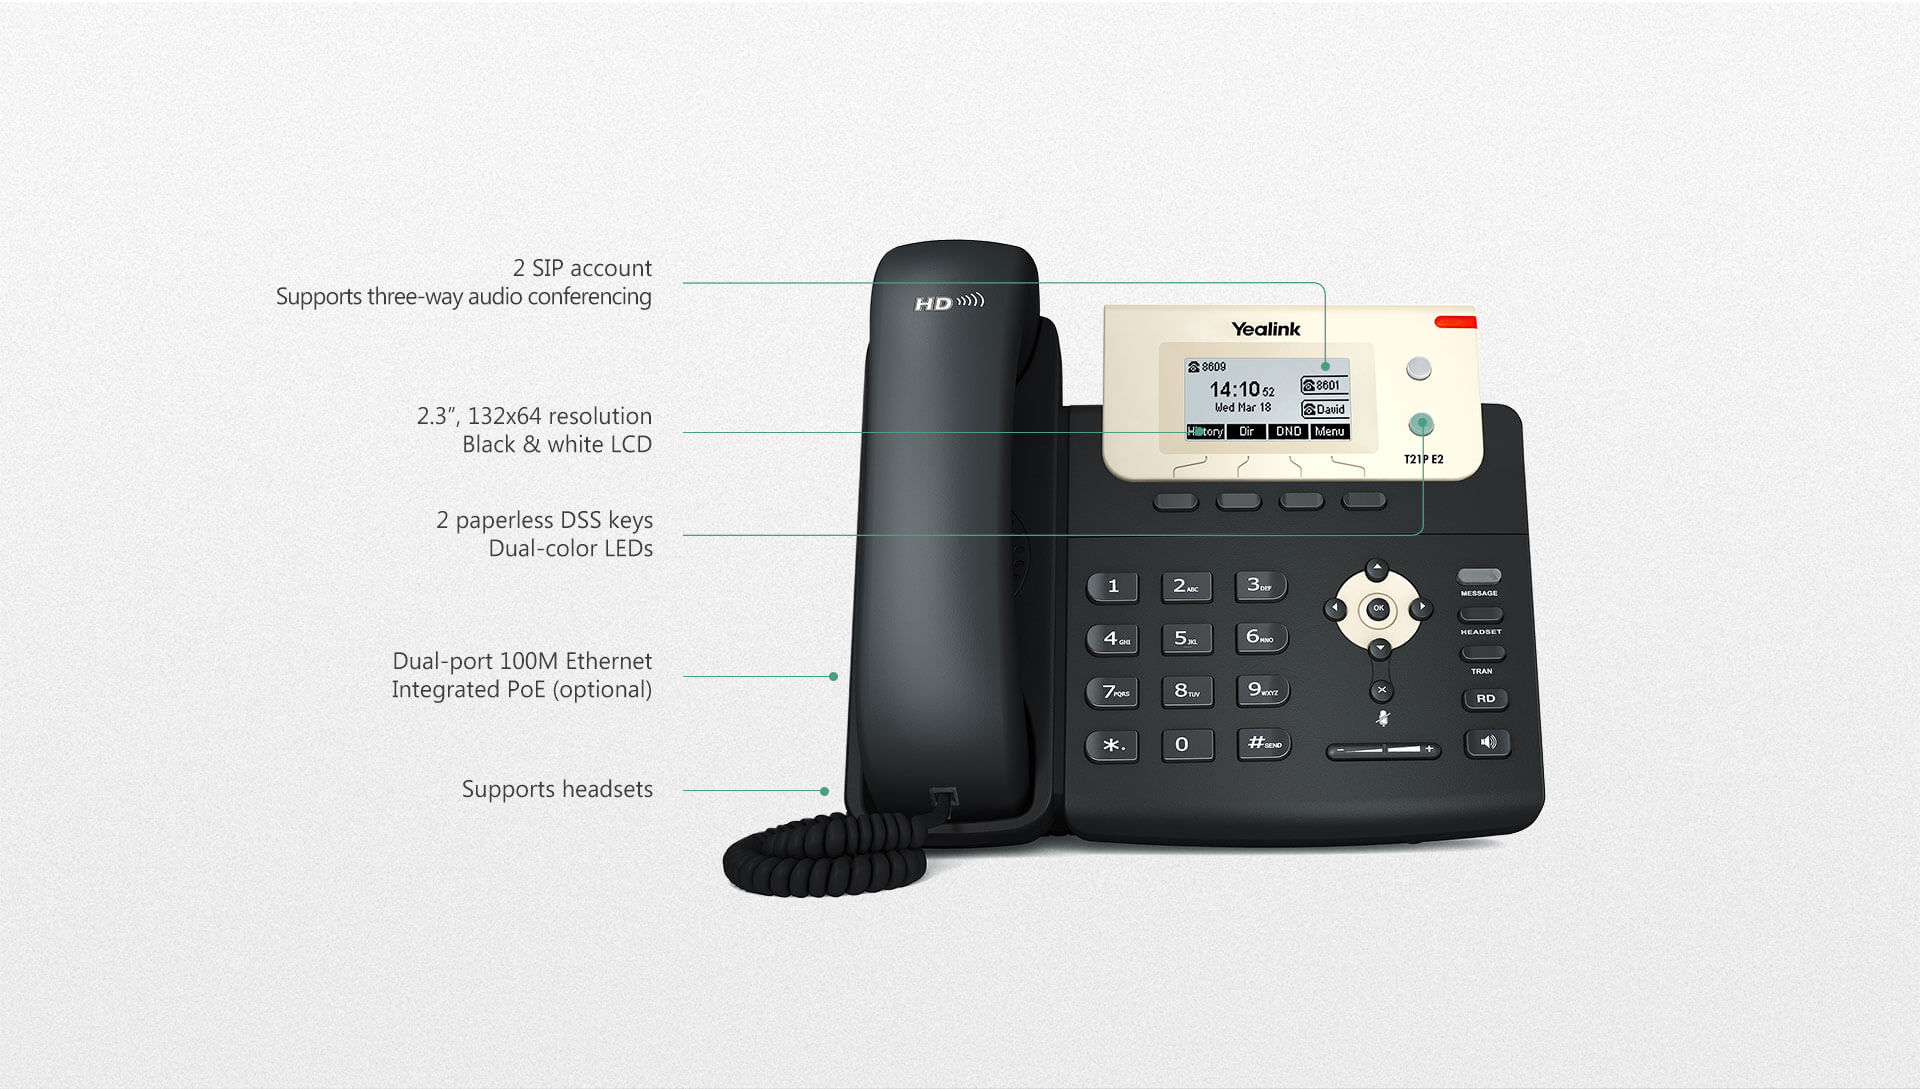 10 Yealink SIP-T21P-E2 Entry Level 2 Line IP Phone HD Voice PoE 10/100 T21P E2 